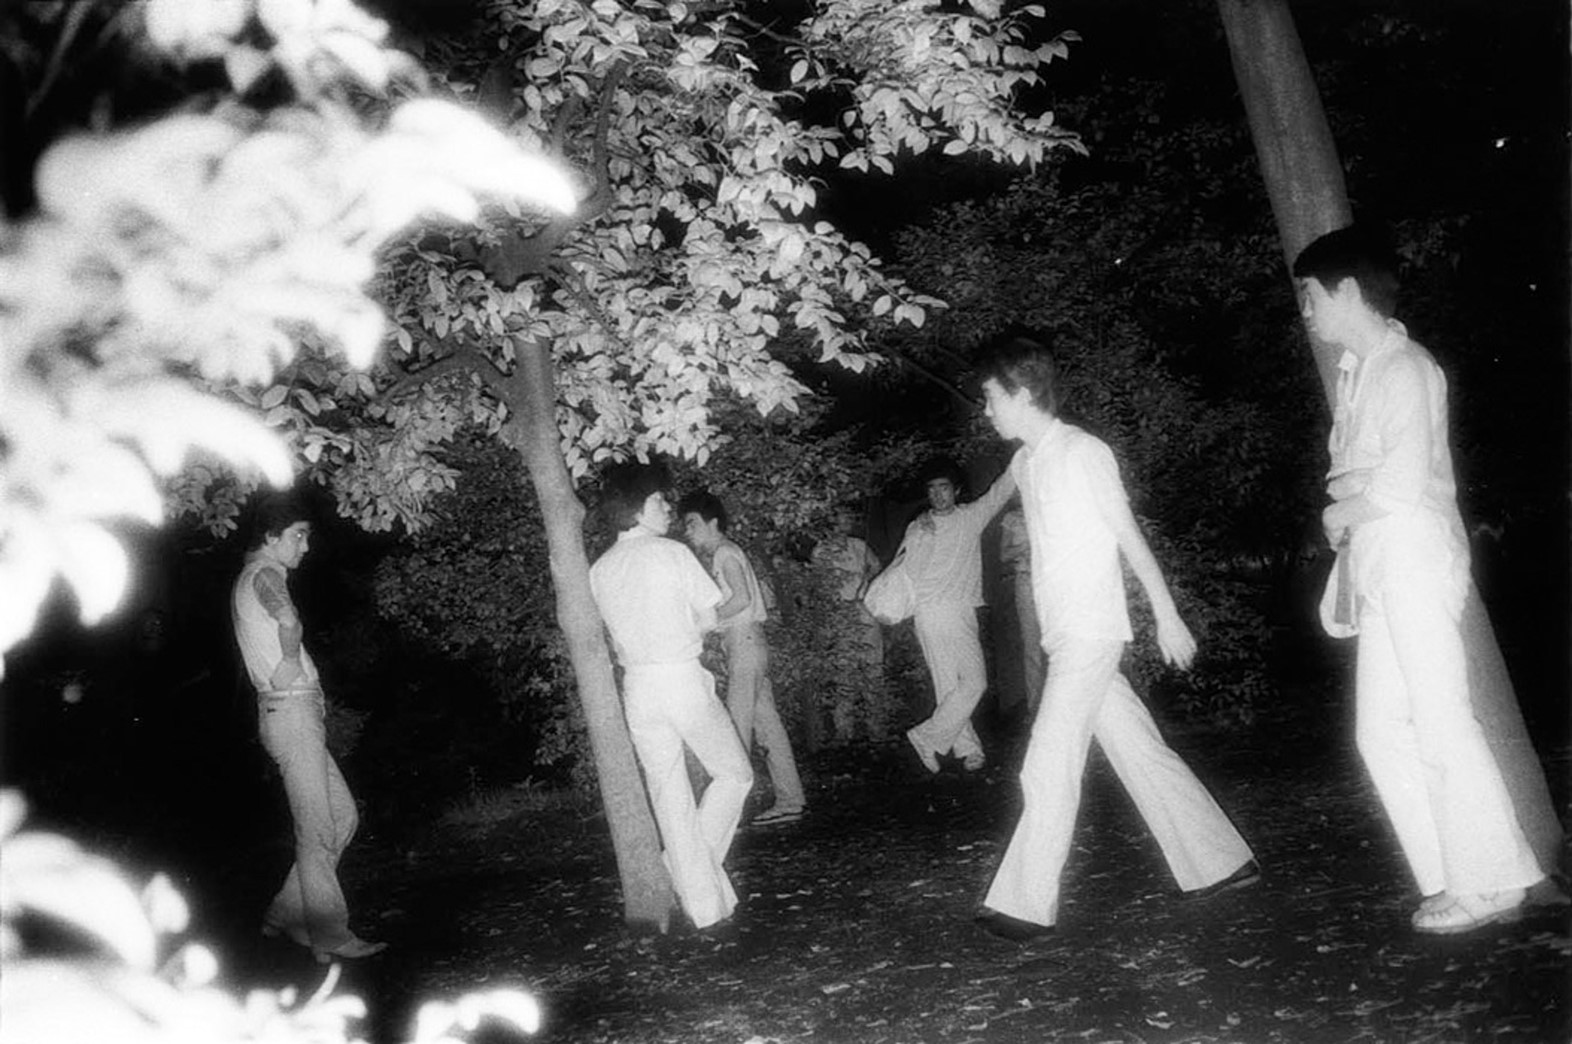 The Park After Dark Illicit Photographs Capturing Voyeurs in 1970s Tokyo AnOther image pic